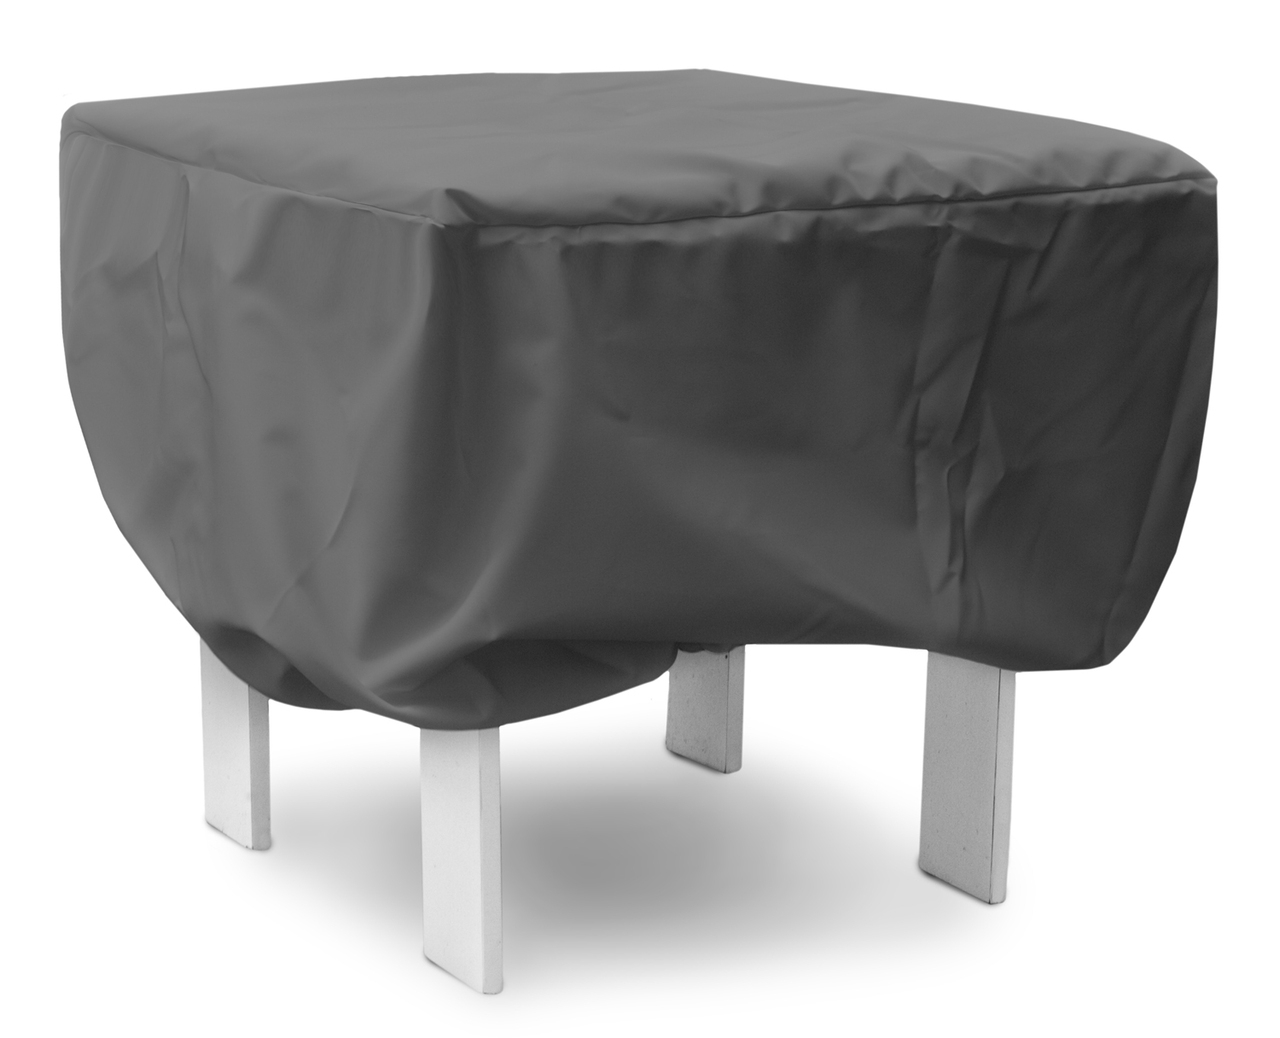 Small Square Table Cover - 24L x 24W x 15H in.